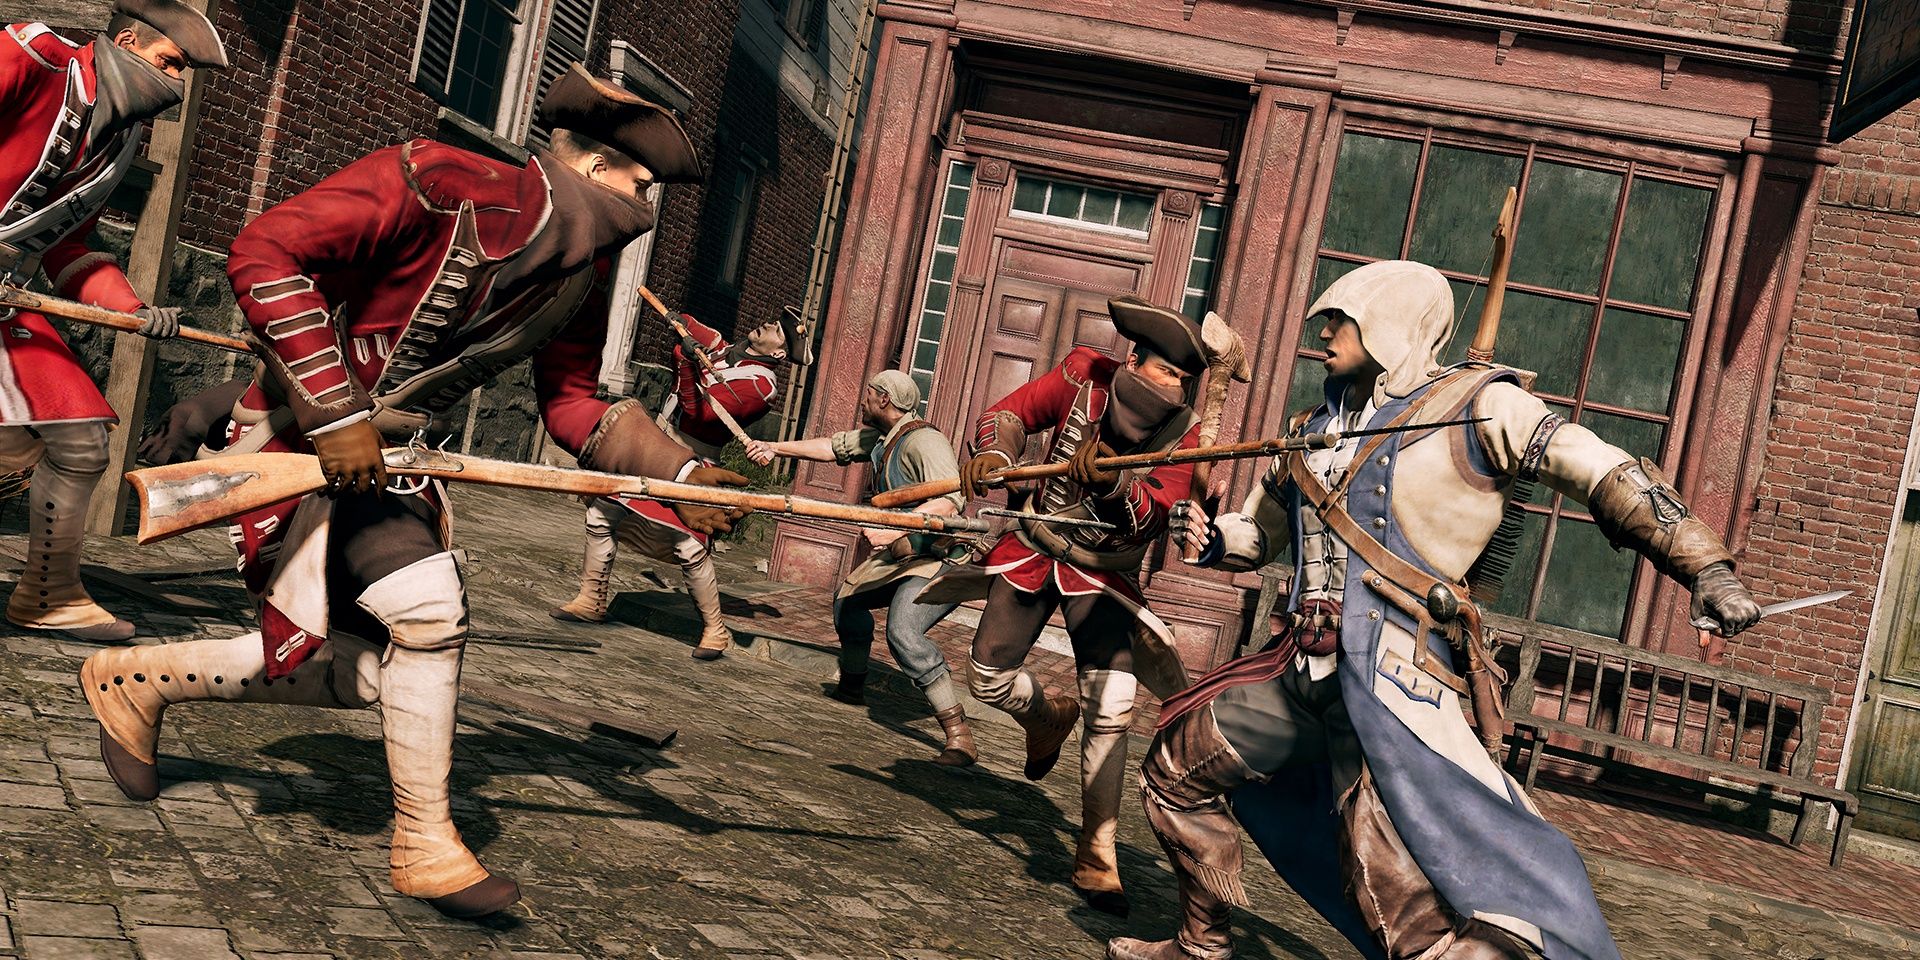 The counterattack in Assassin's Creed 3